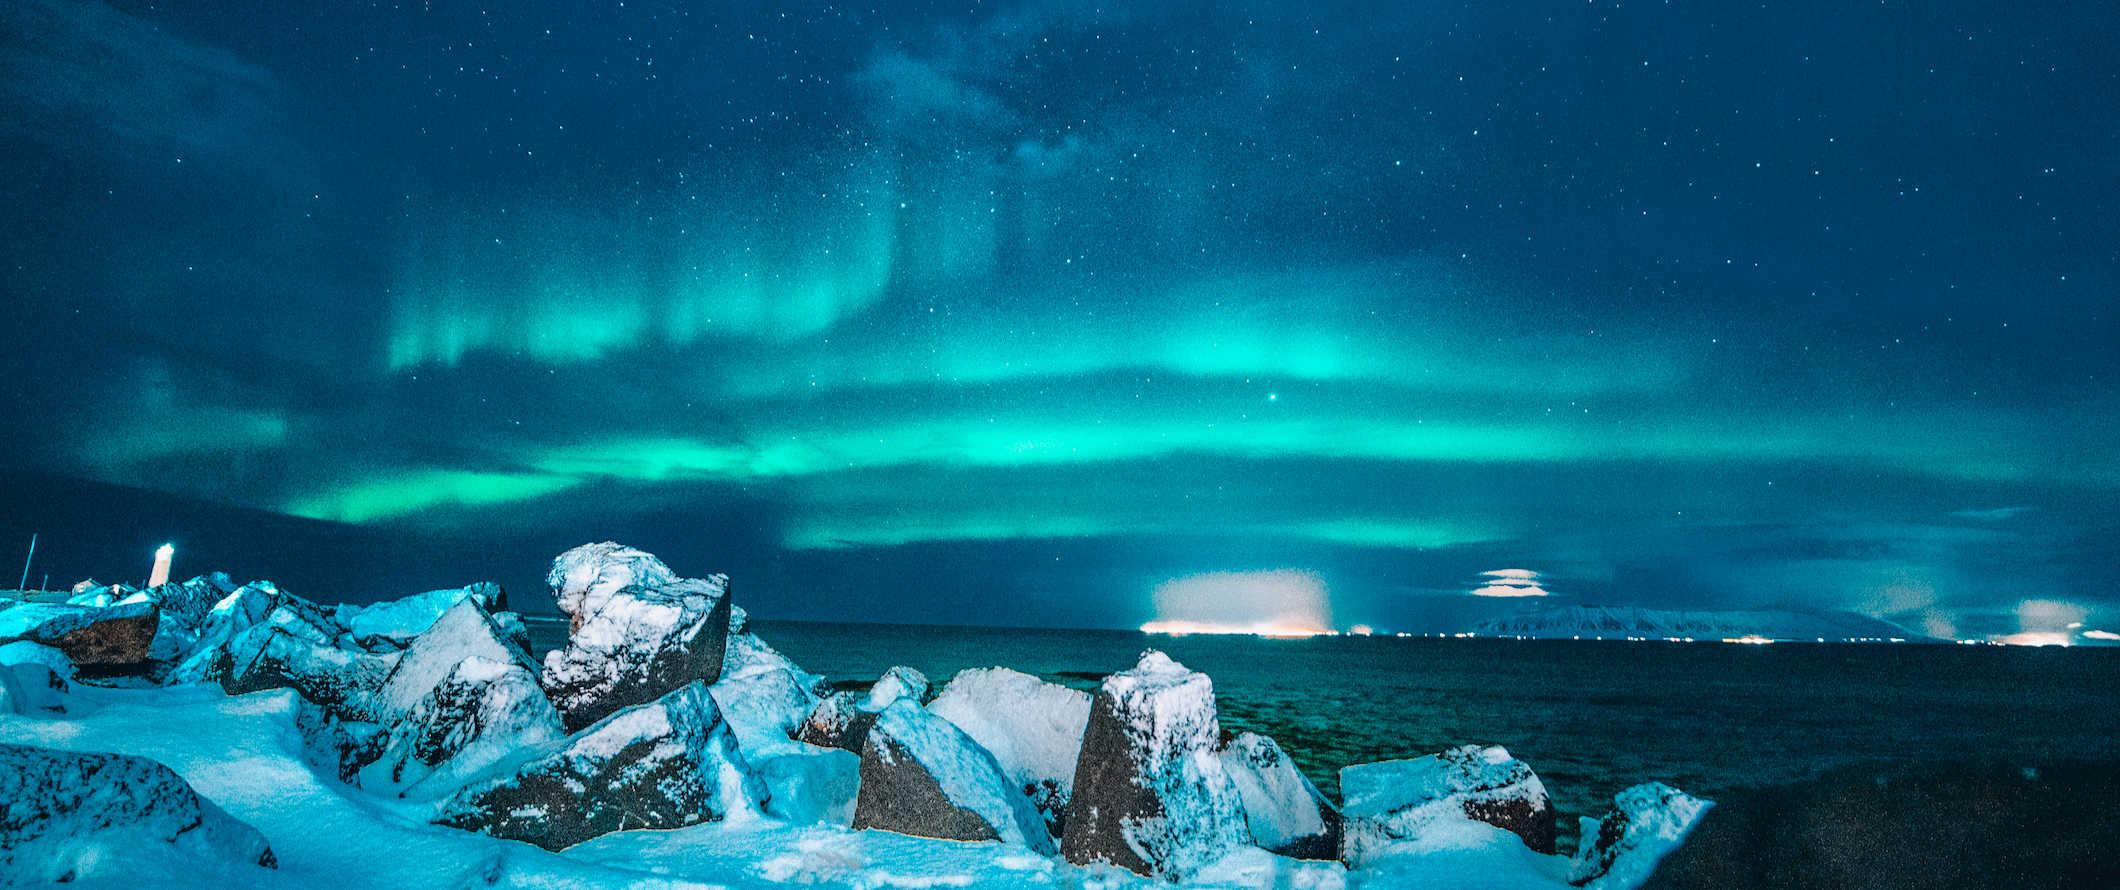 The Northern Lights shining bright green over a snowy Icelandic landscape